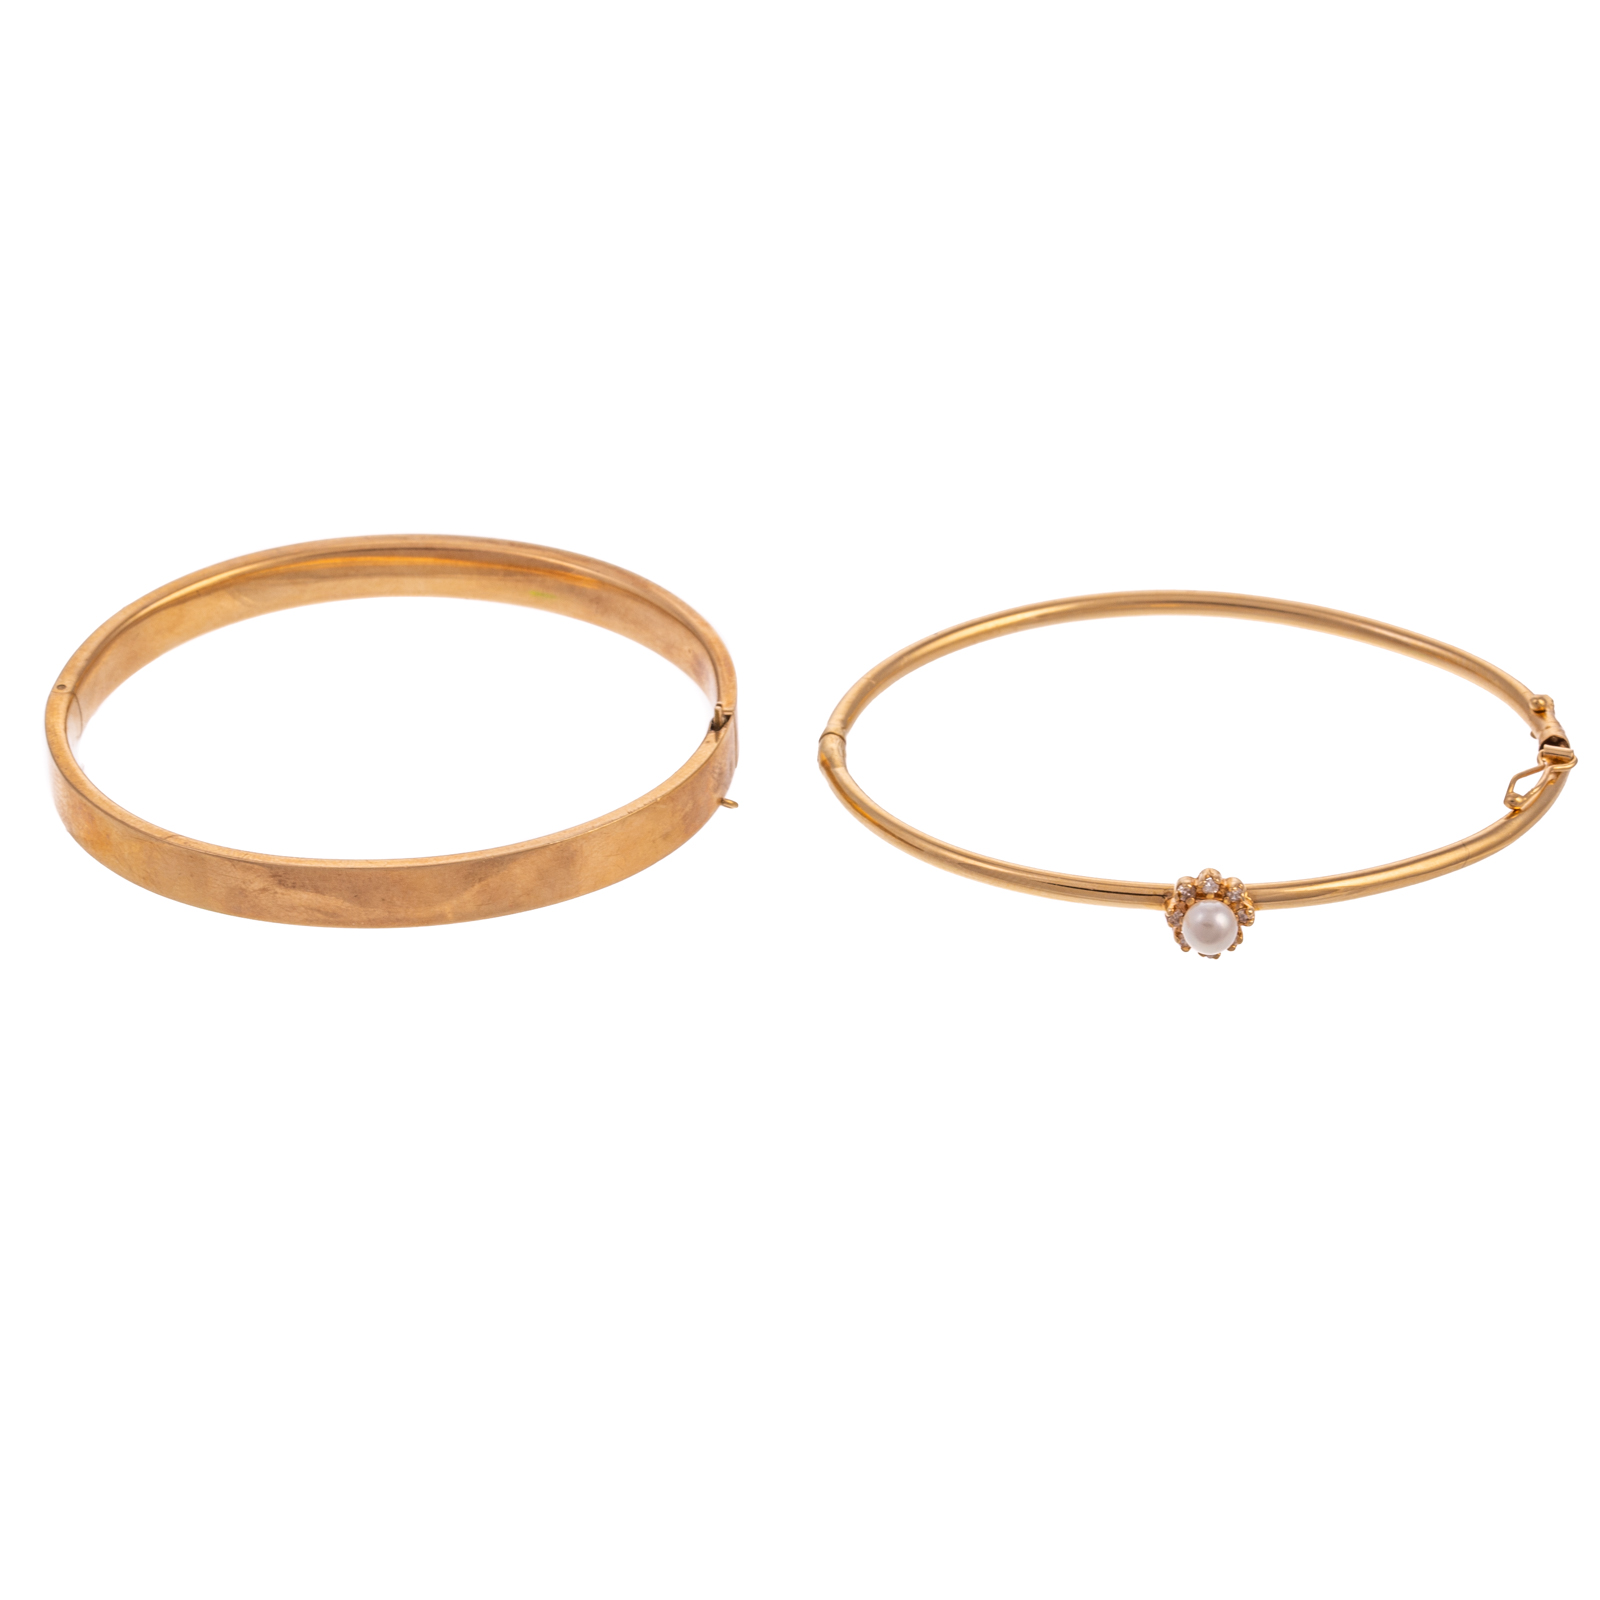 TWO 14K YELLOW GOLD BANGLES 1  338d62